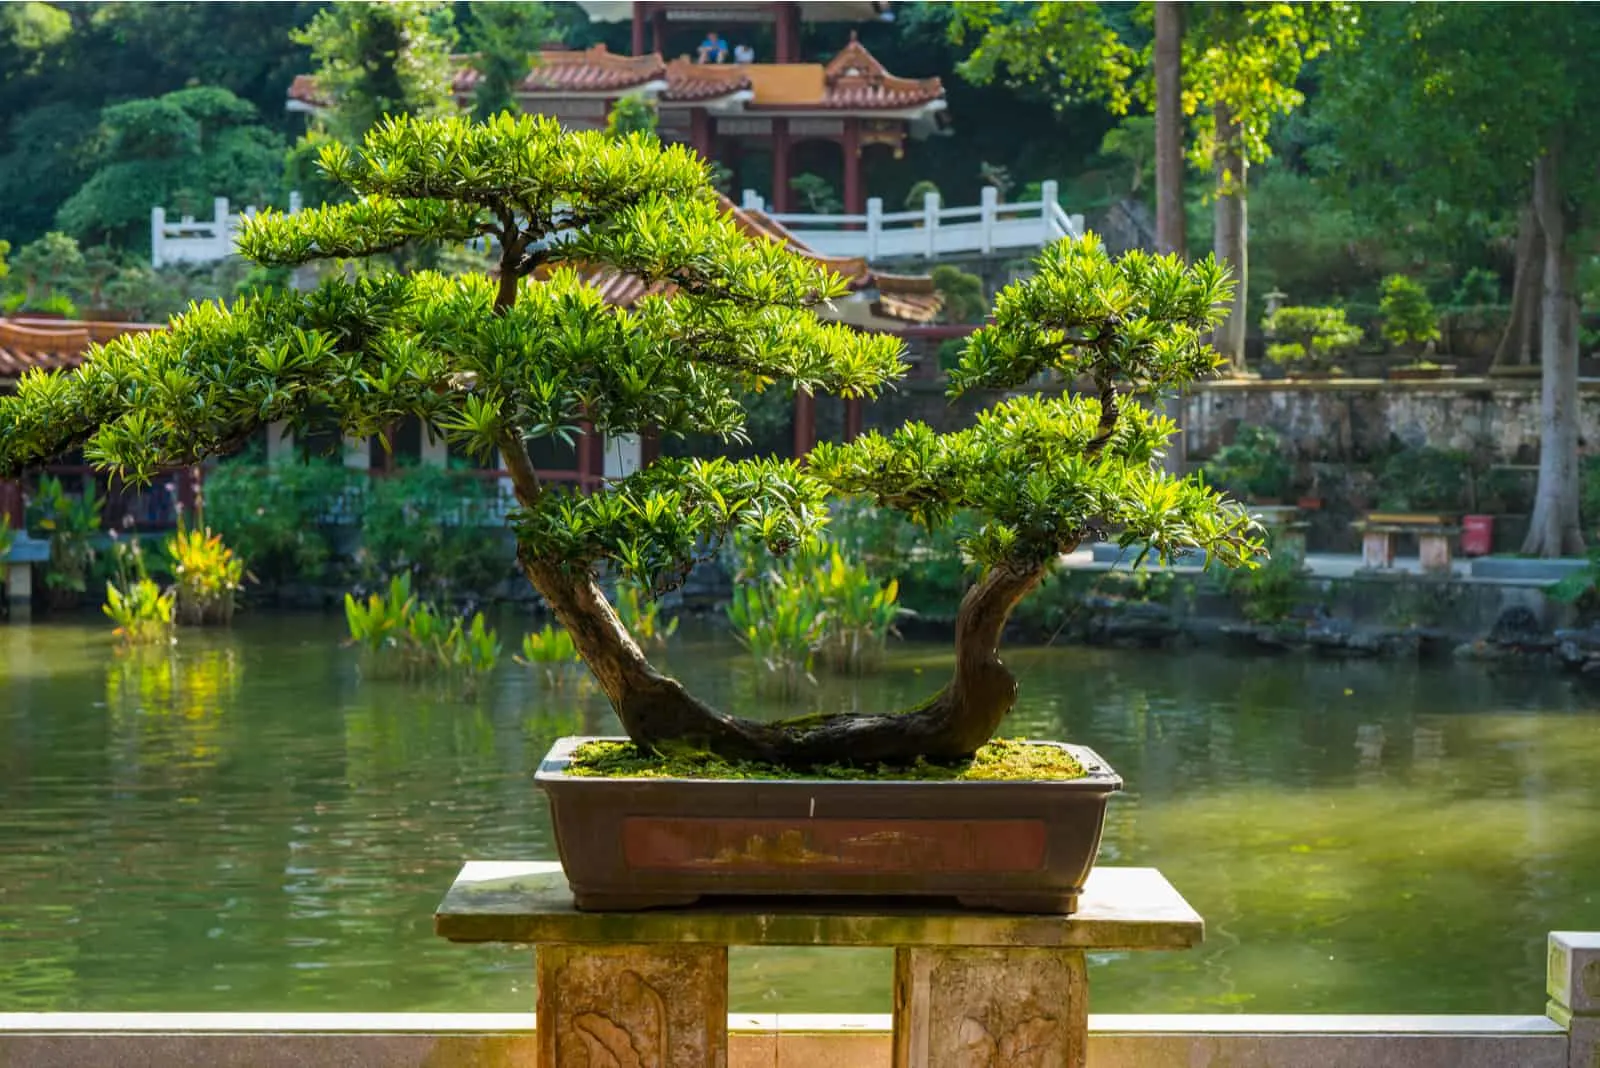 Bonsai Trees in a pot in the park